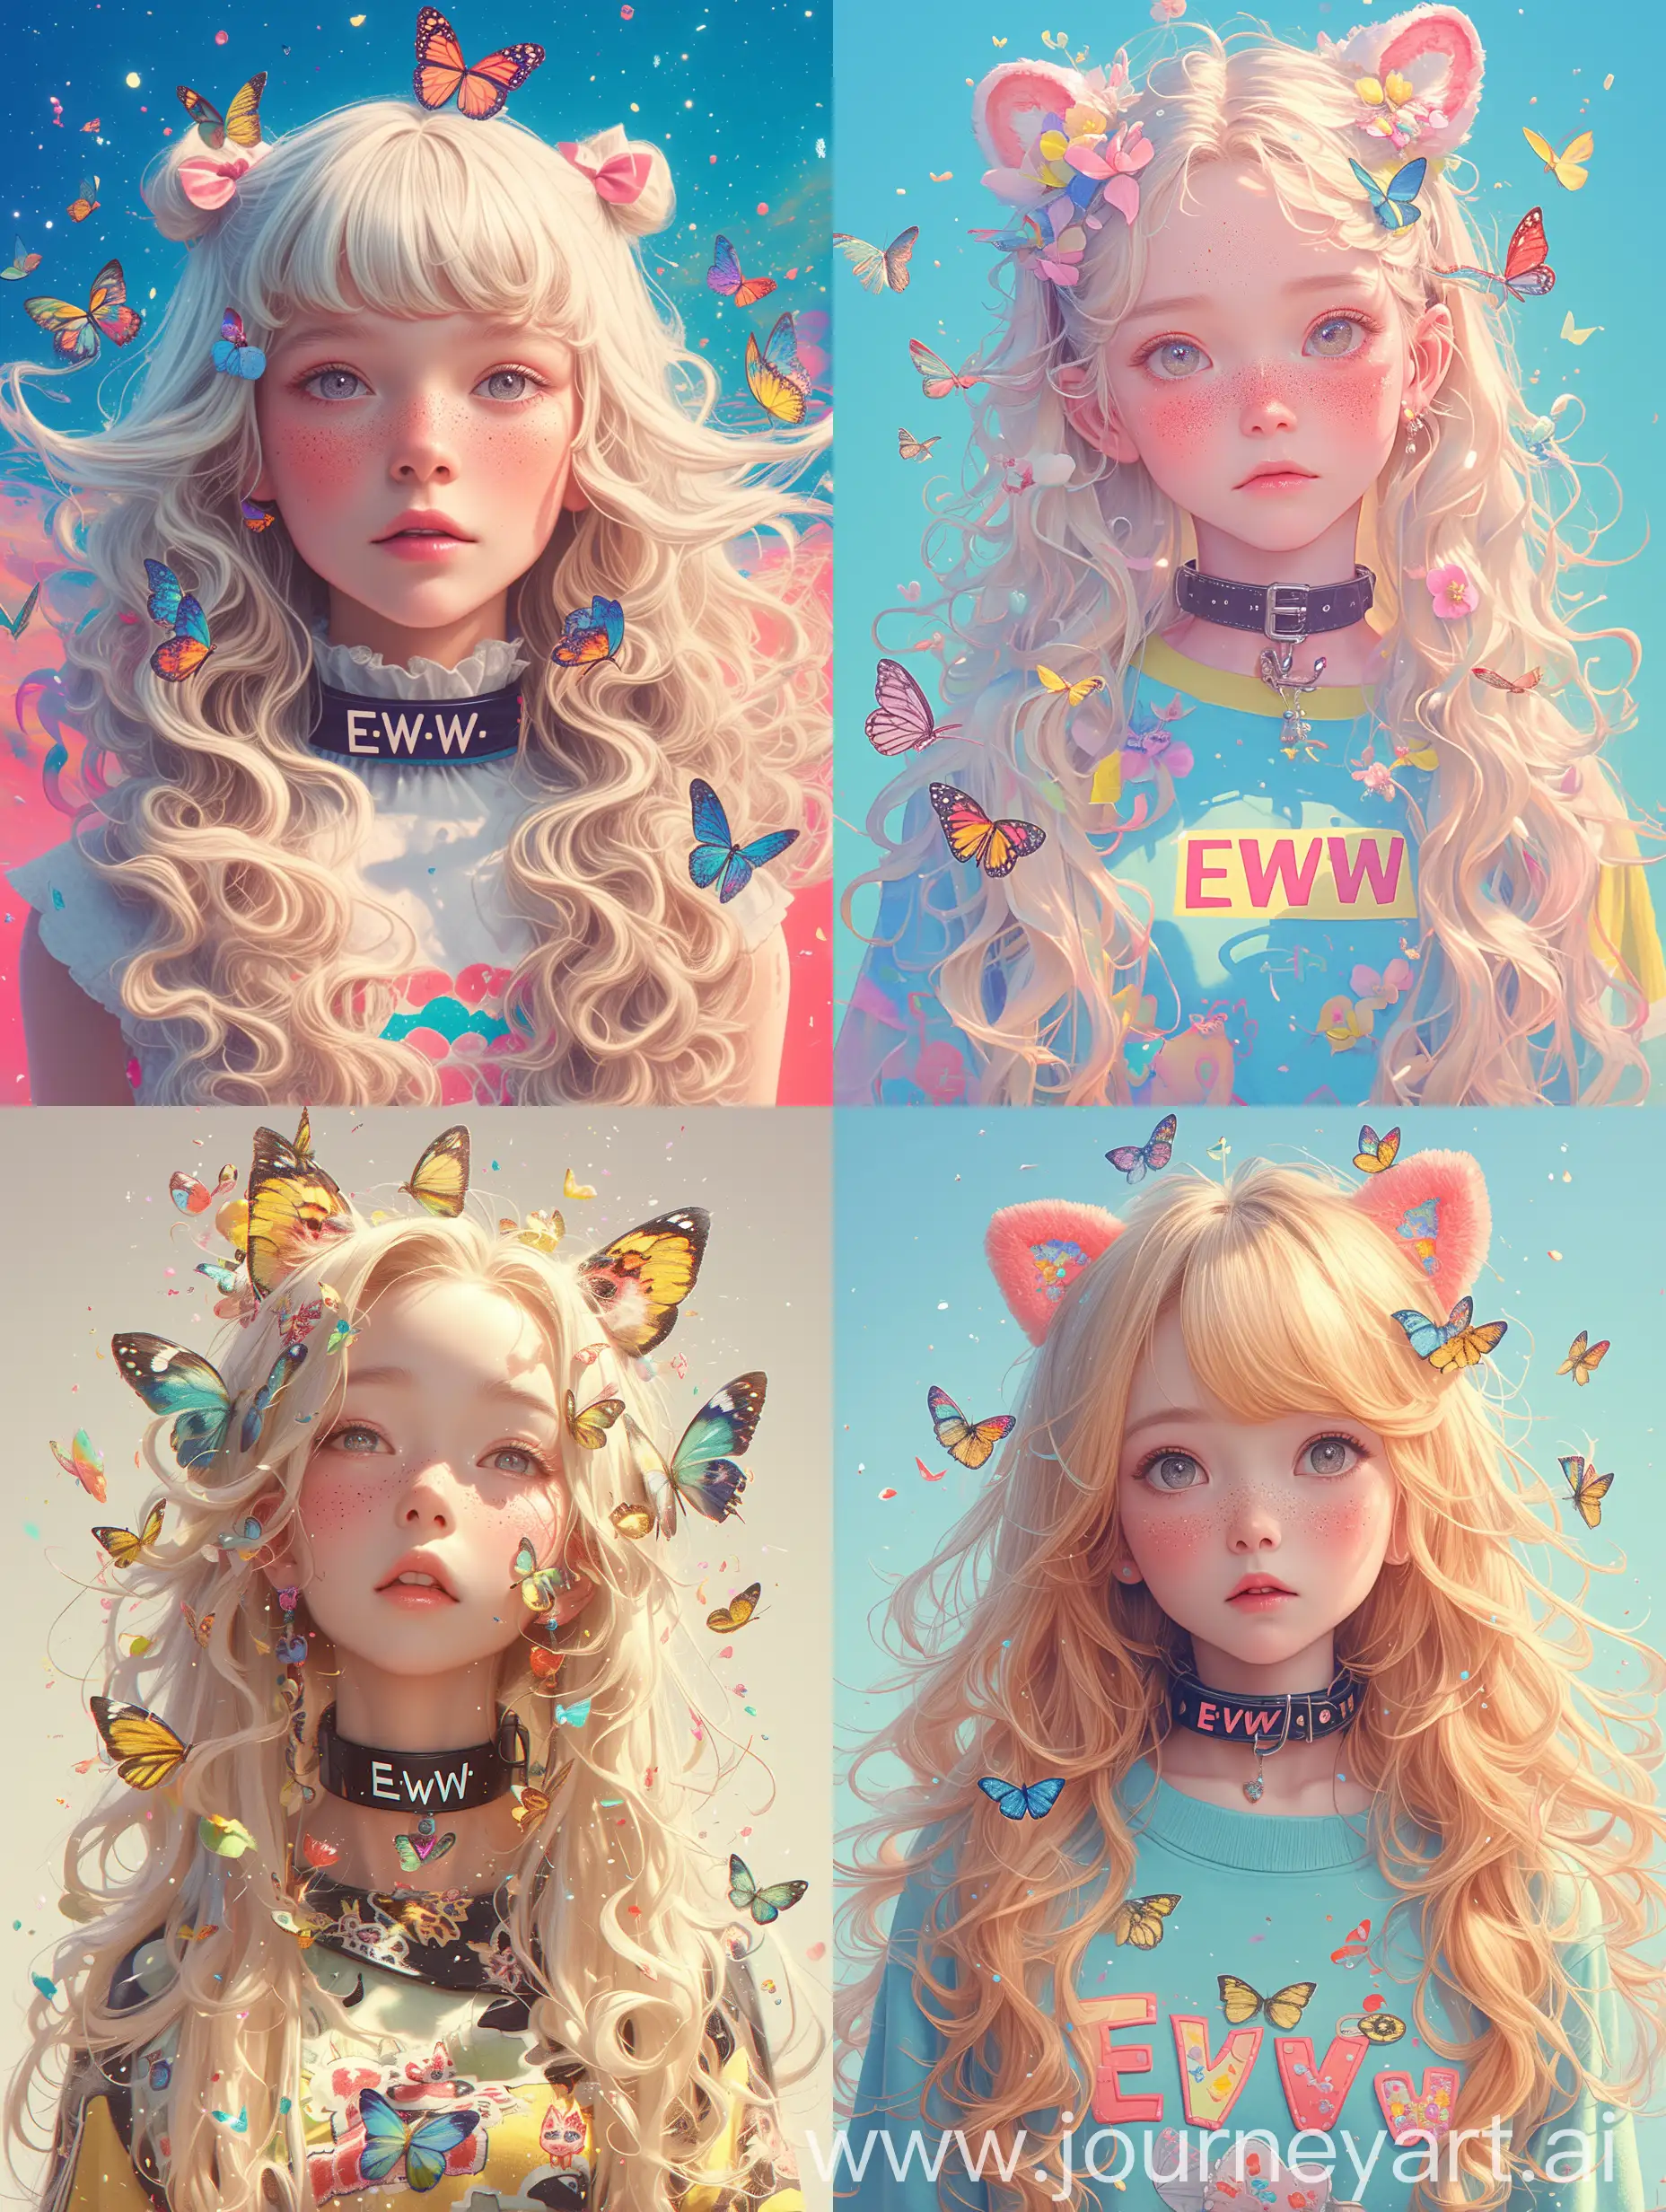 Enchanting-Anime-Girl-with-Freckles-and-Butterfly-Collar-in-Surreal-Realistic-Scene